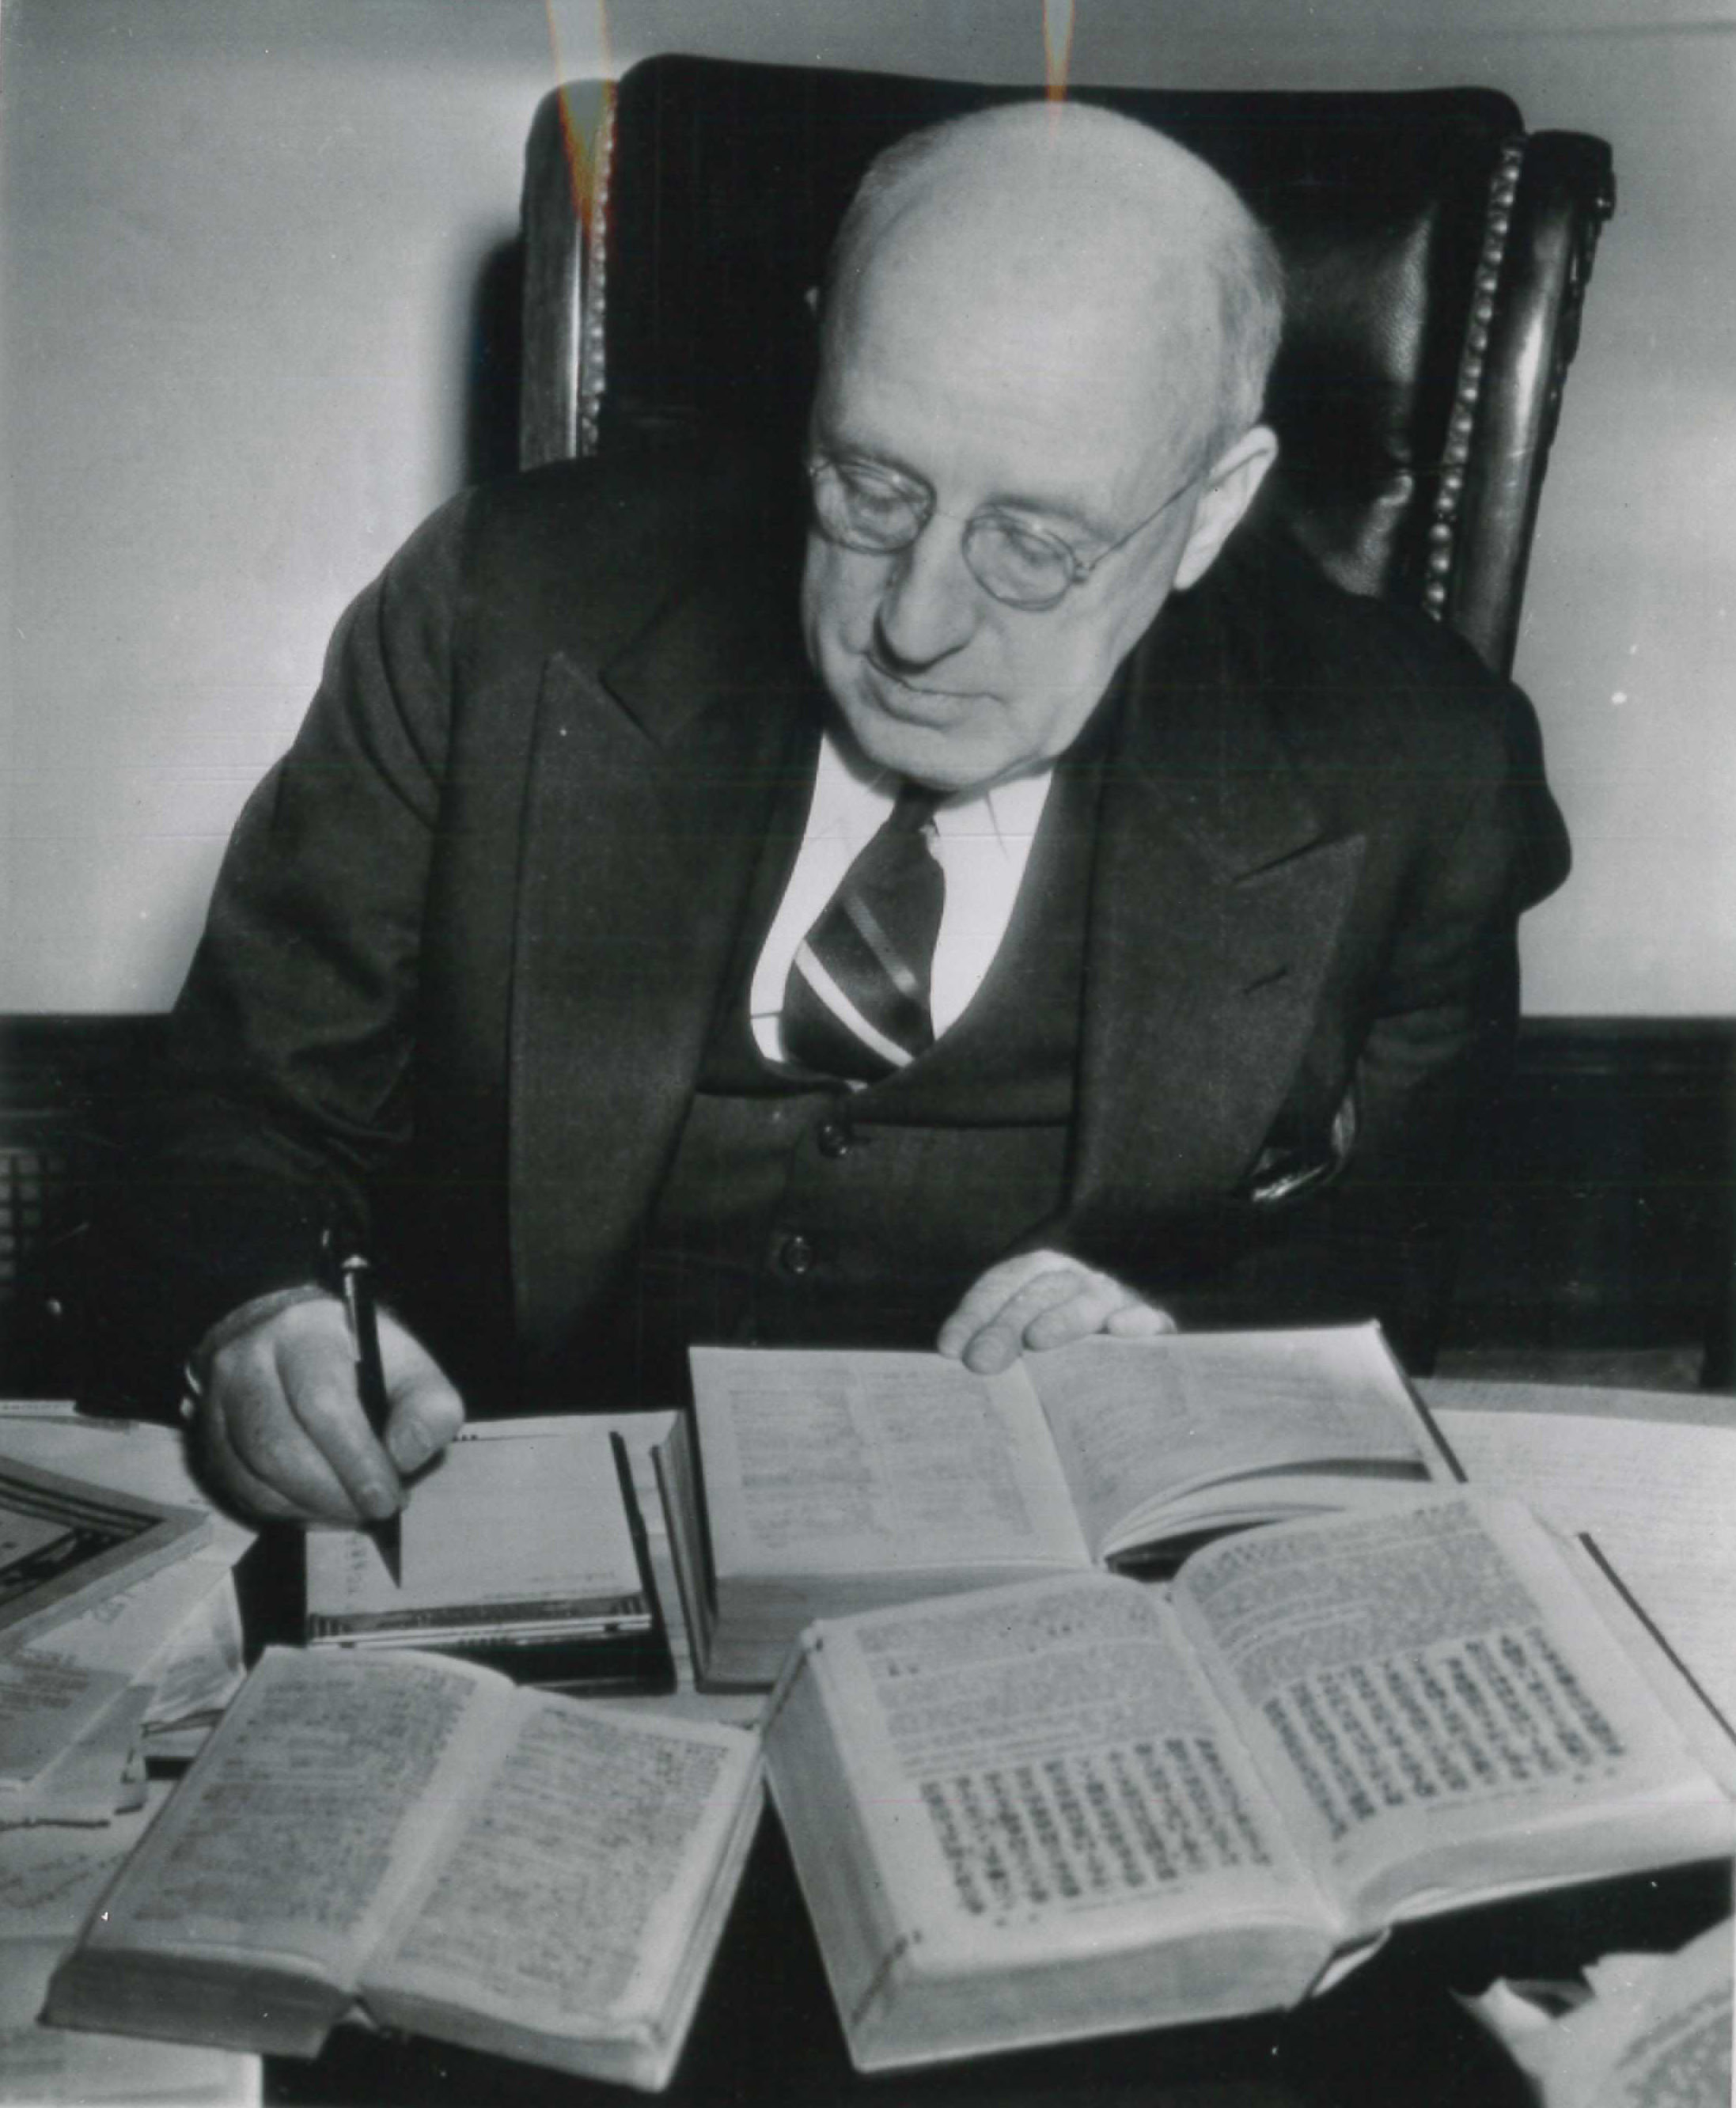 Senator Elbert Thomas, a former missionary to Japan, working on the translation of a script for a shortwave radio broadcast in Japanese beamed from the Pacific Coast to Japan, 11 January 1942. Before him on the desk is an English-Japanese dictionary and other reference books. AP Wire Photo.